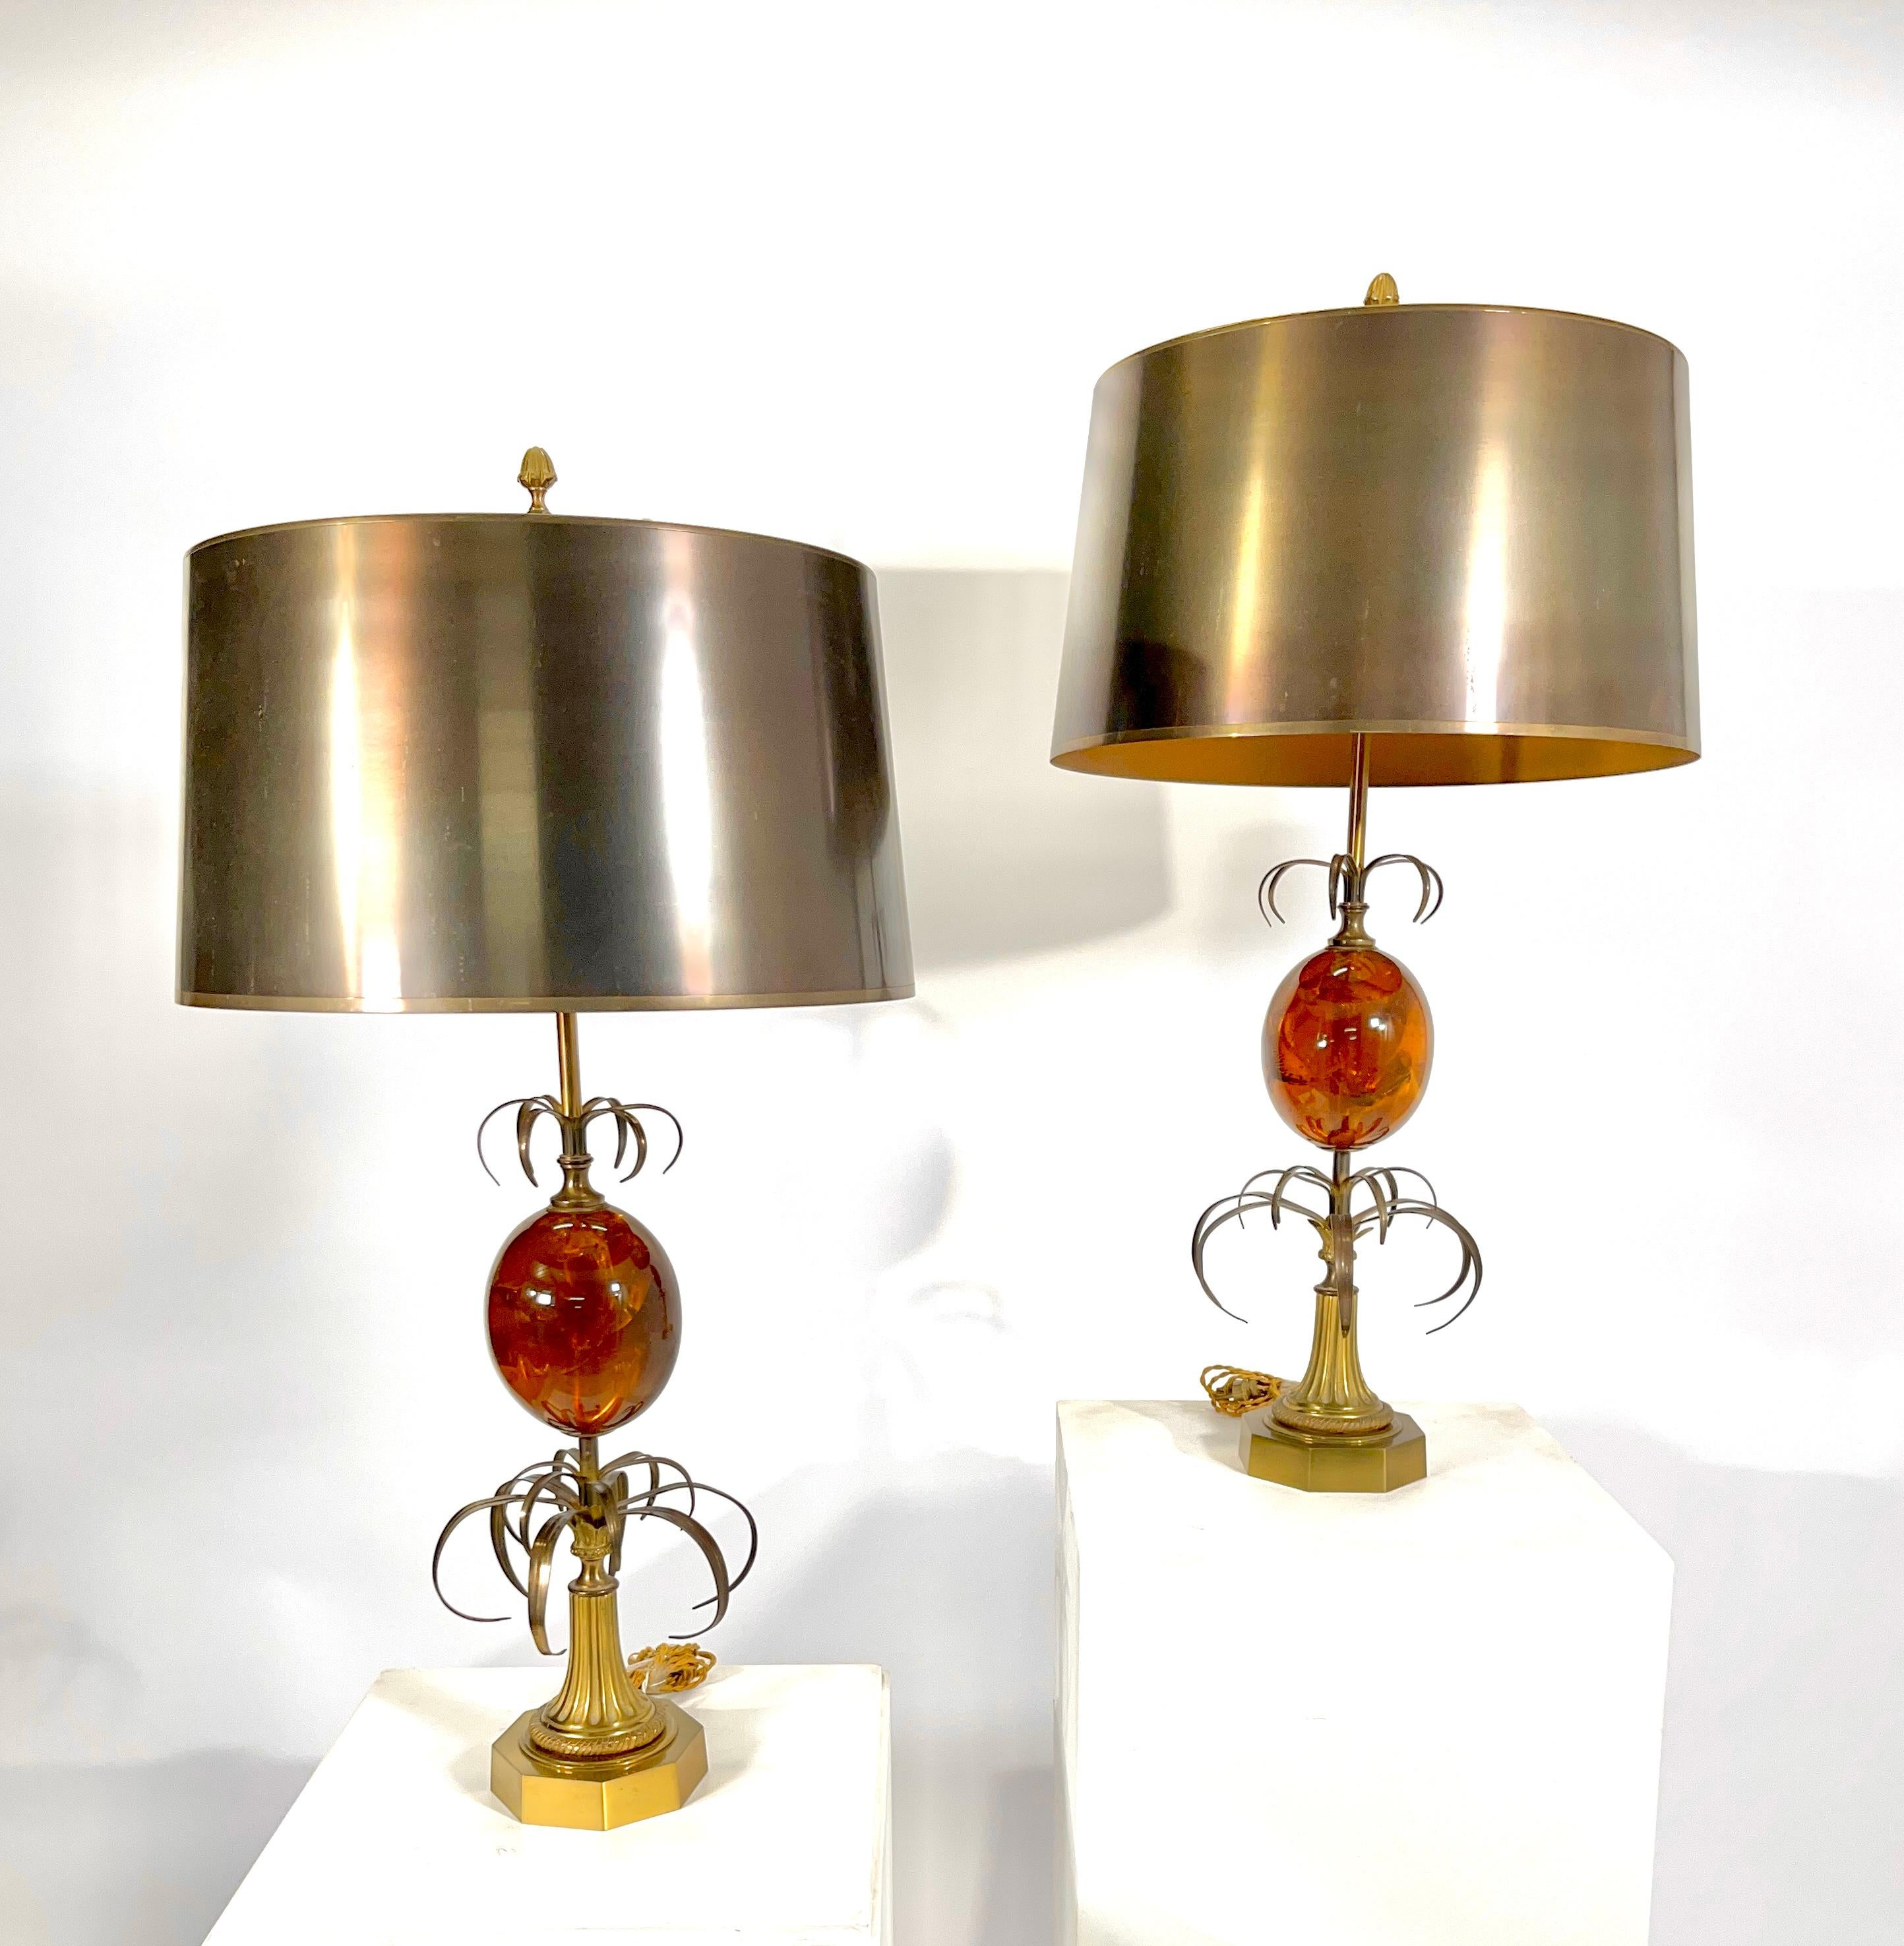 Pair of table lamps by Maison Charles, stamped Charles Made in France Model 